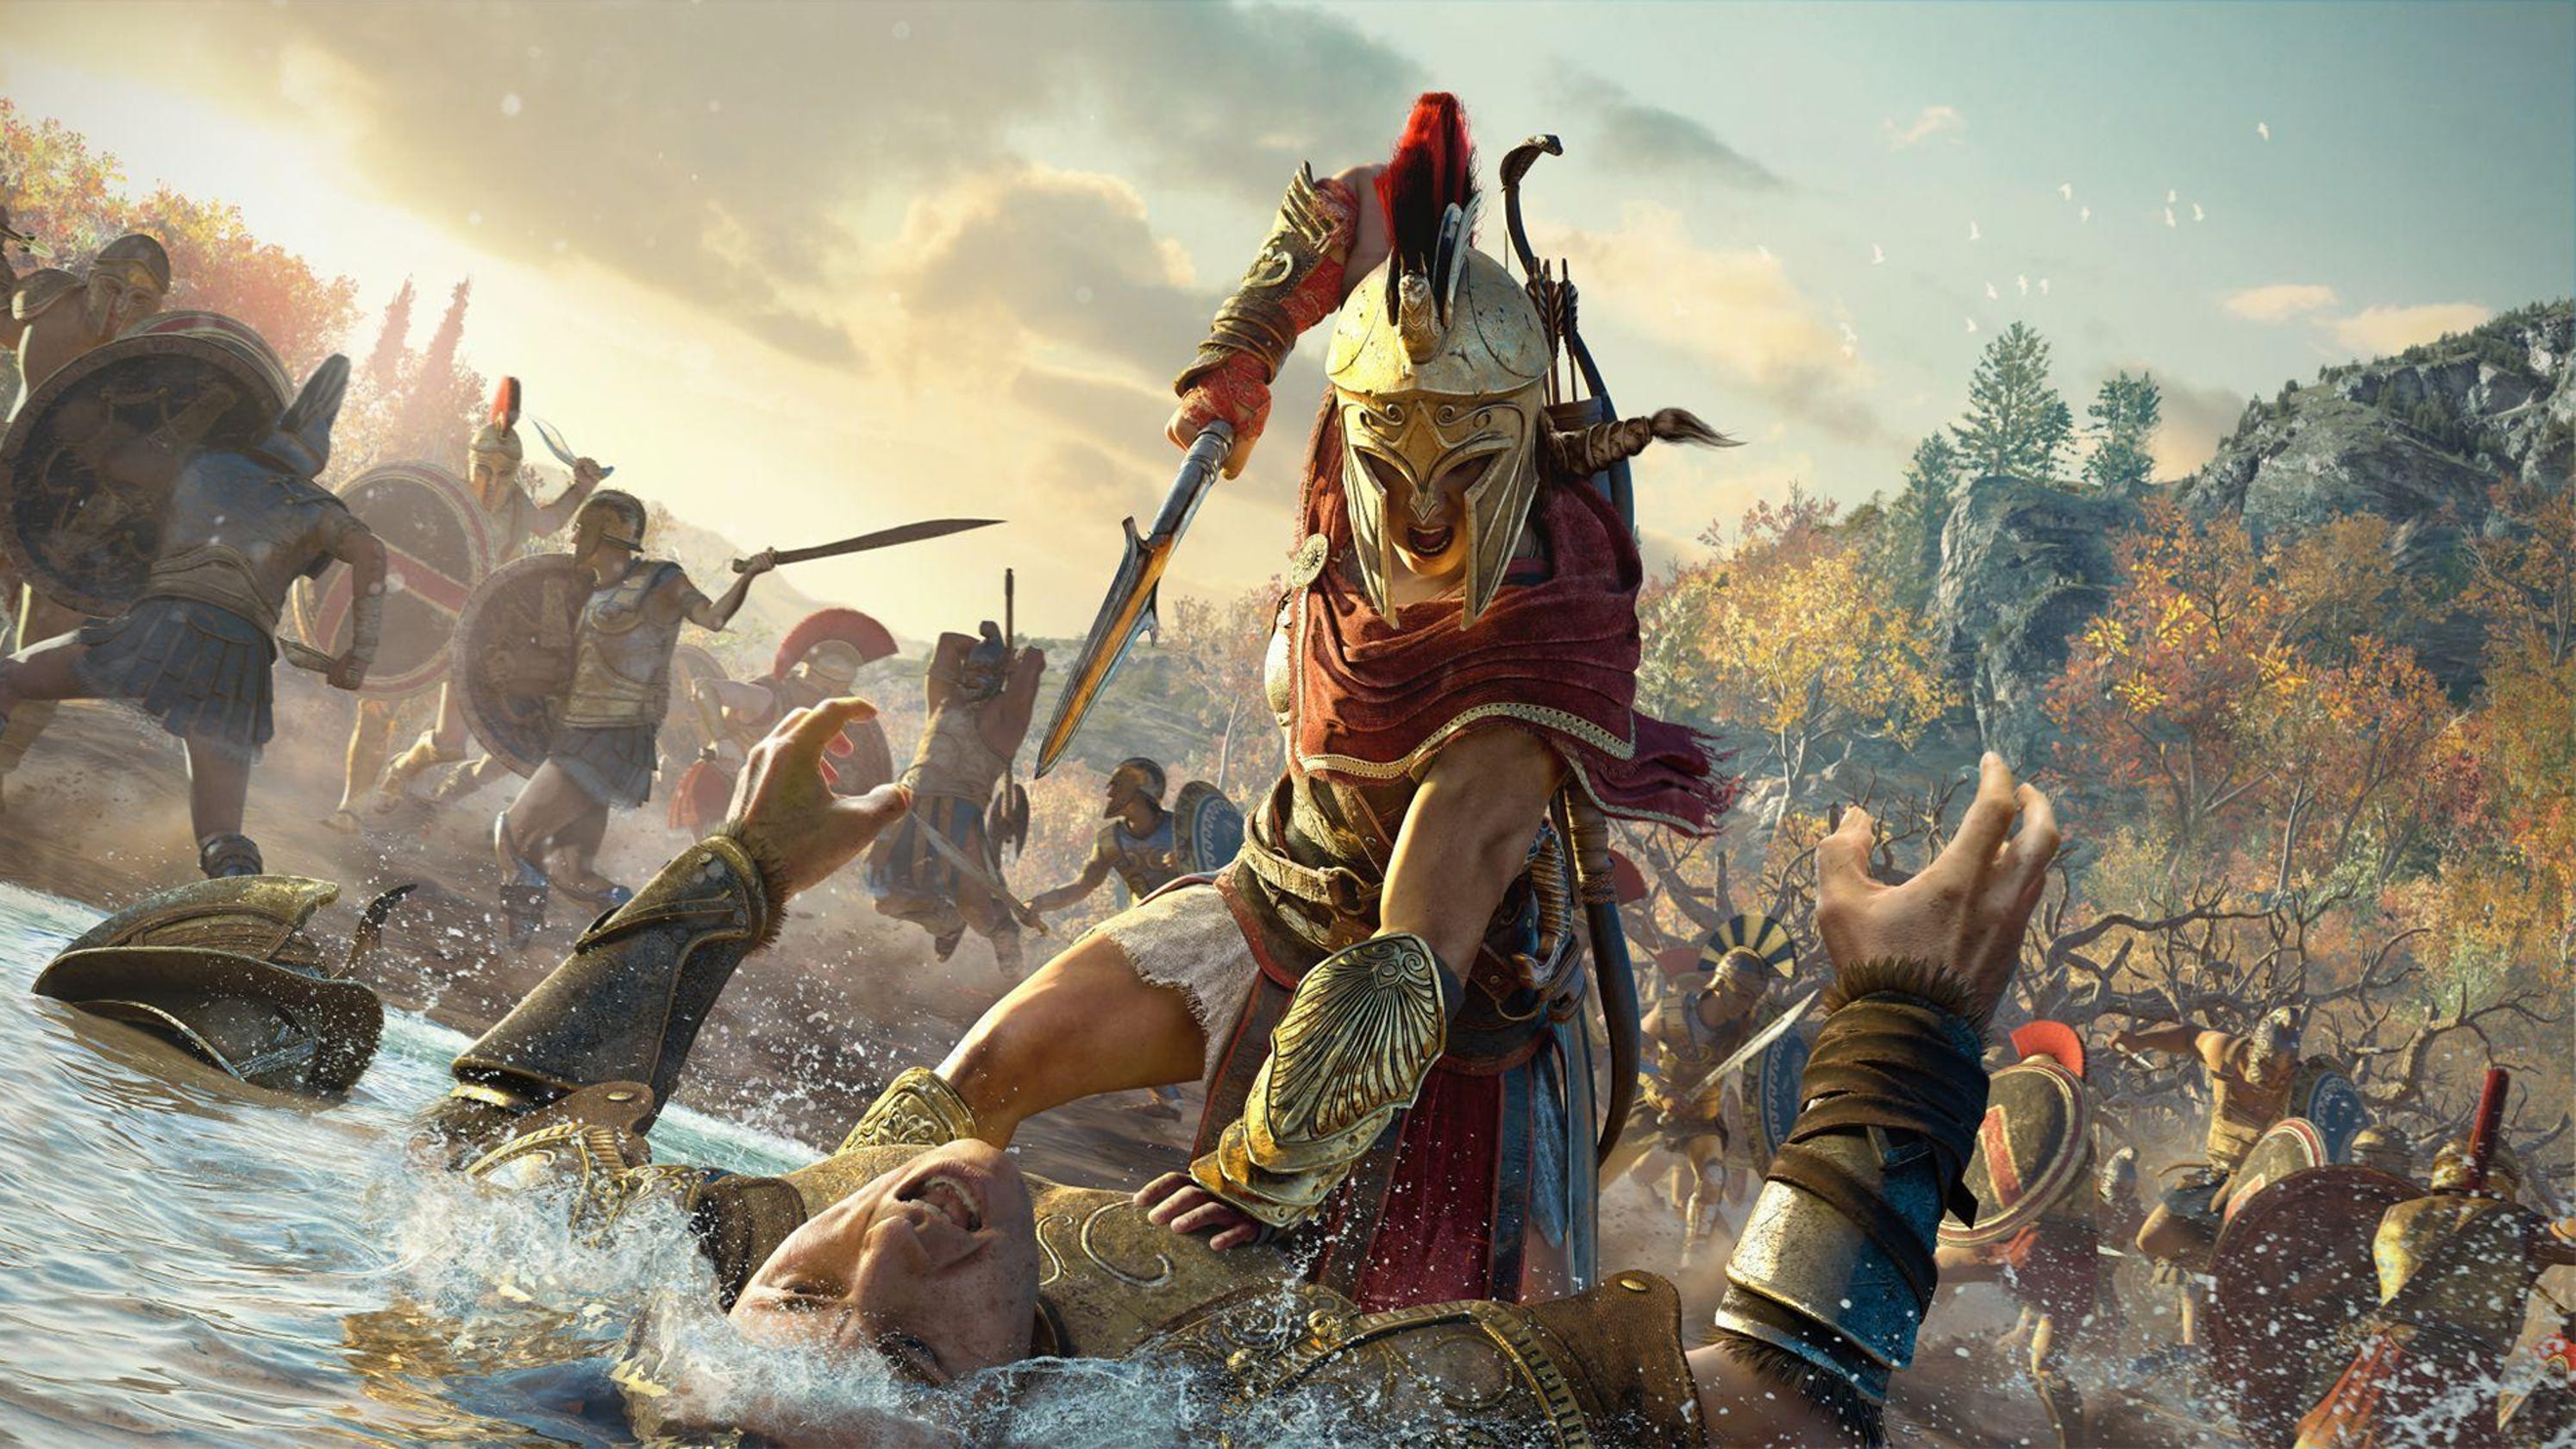 Strange PC Games Review: assassins creed odyssey the 